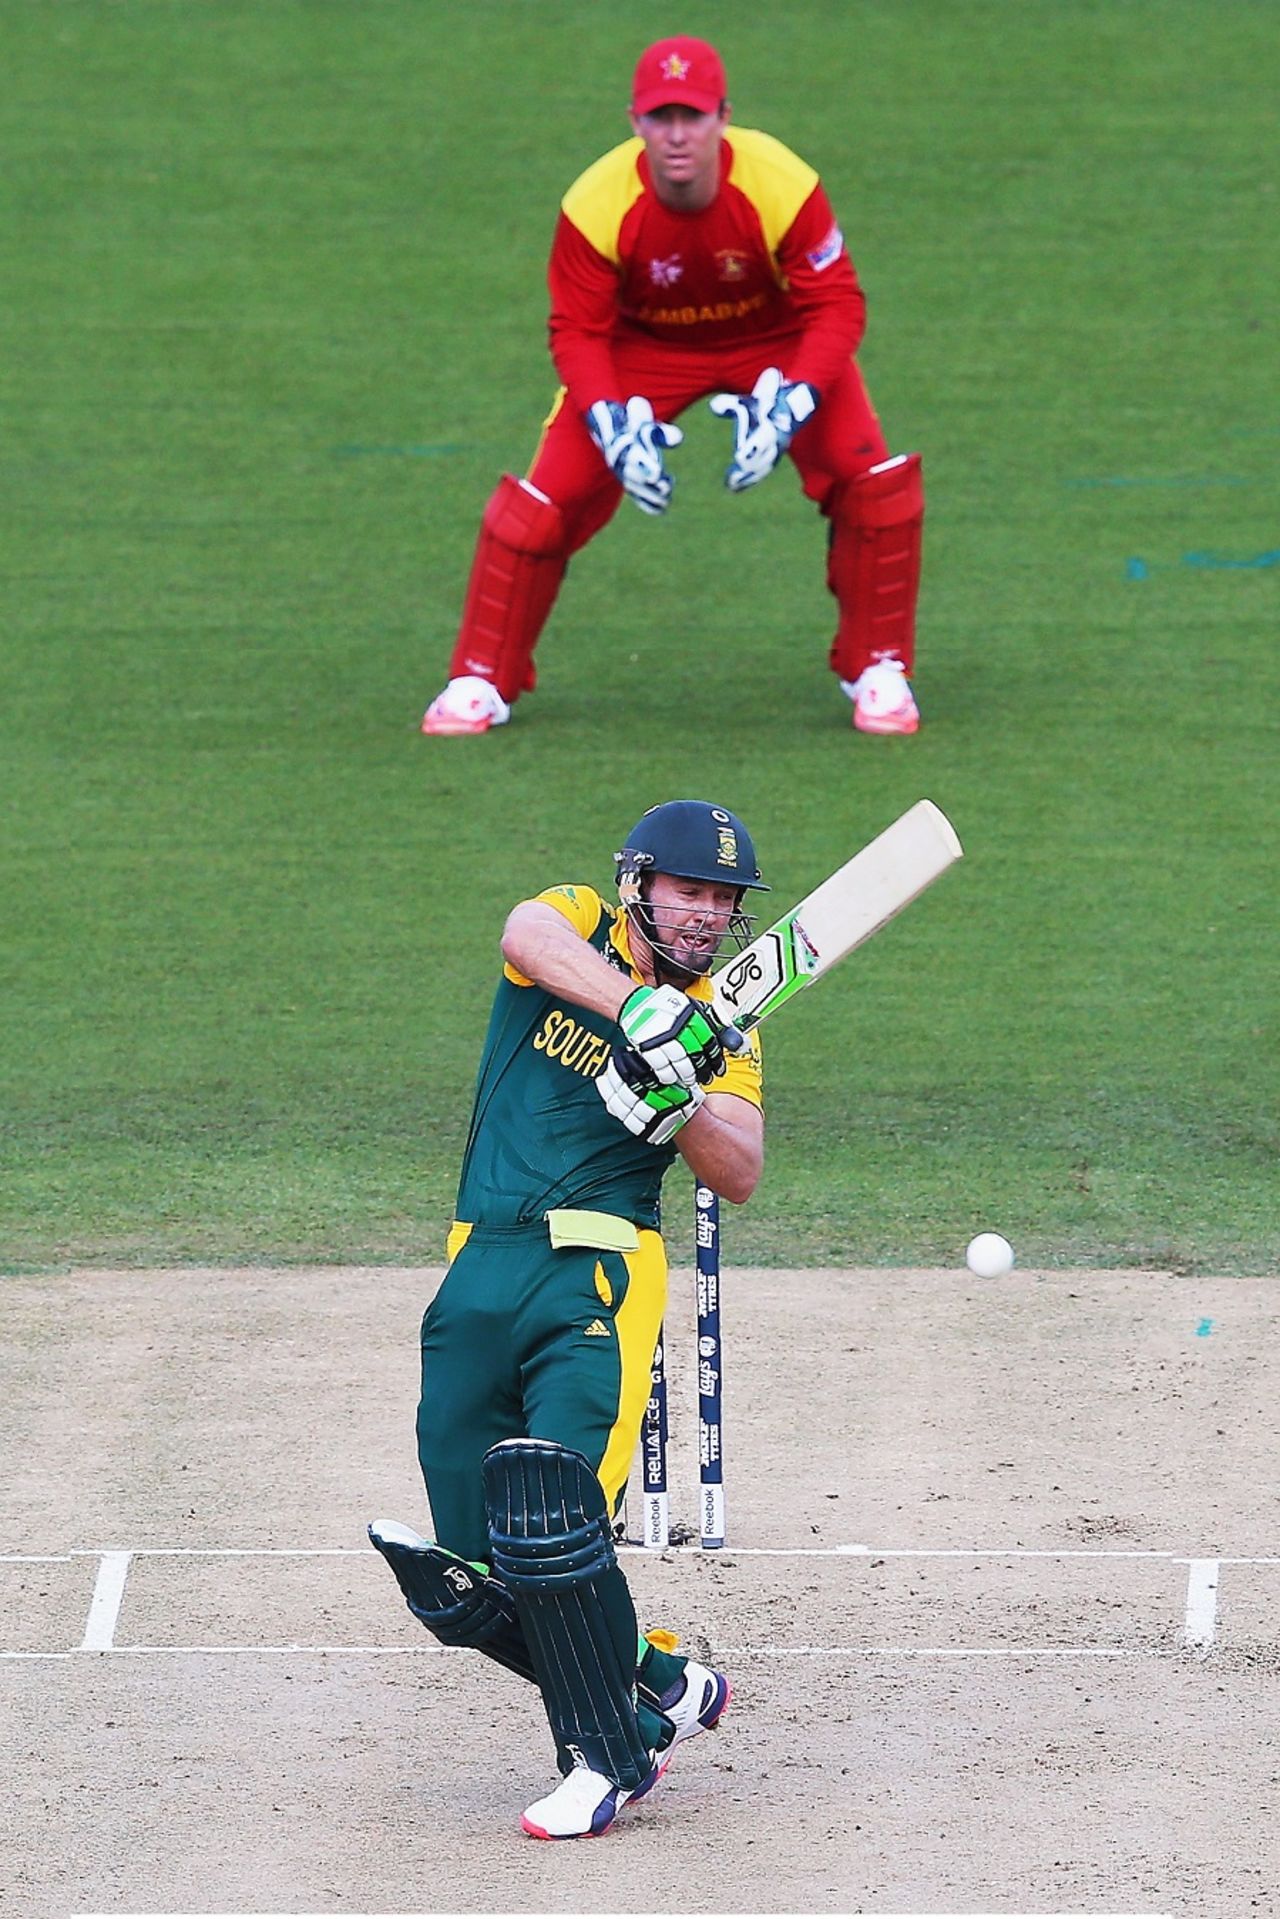 AB de Villiers, having advanced at the bowler, adjusts to play a pull, Group B, World Cup 2015, Hamilton, February 15, 2015